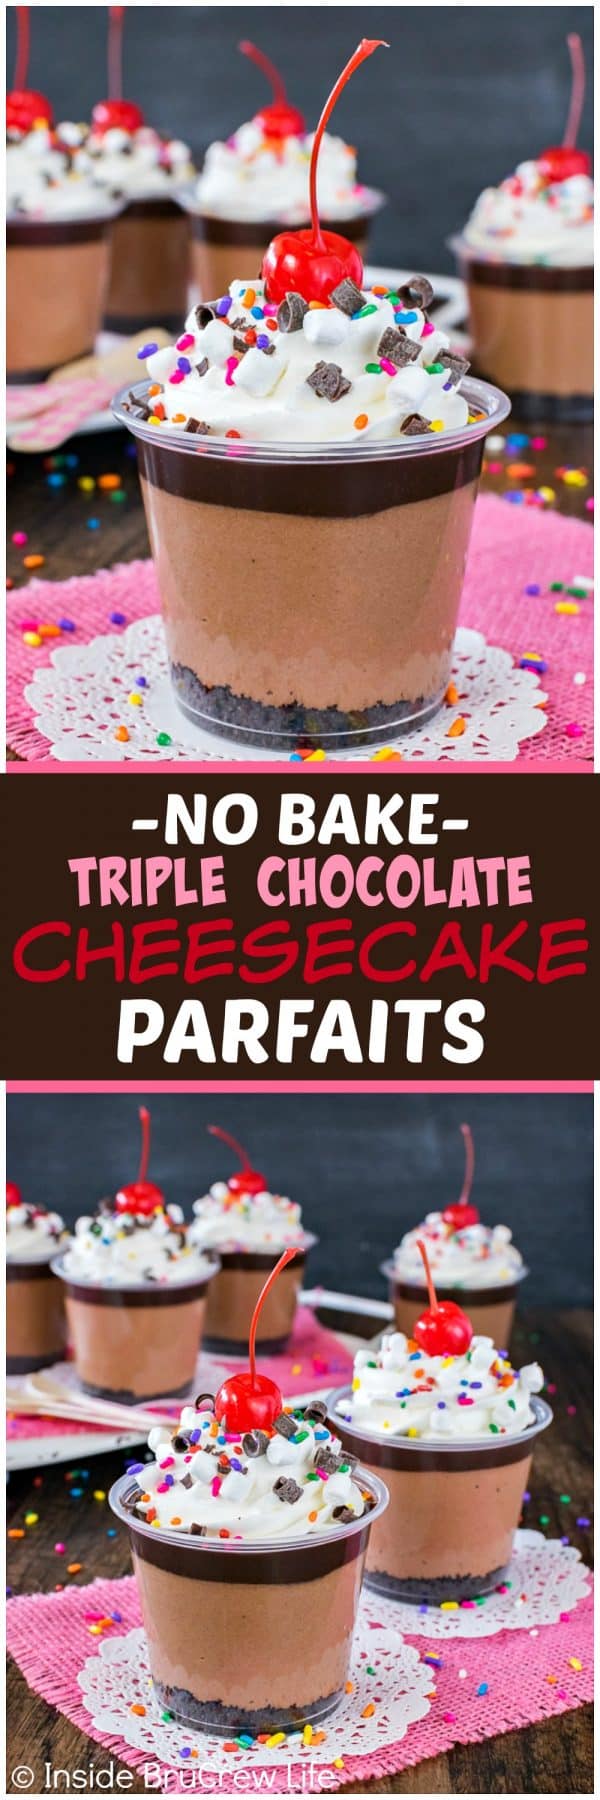 No Bake Triple Chocolate Cheesecake Parfaits - three layers of chocolate goodness, sprinkles, and cherries make this such a fun recipe to make for any party or celebration!